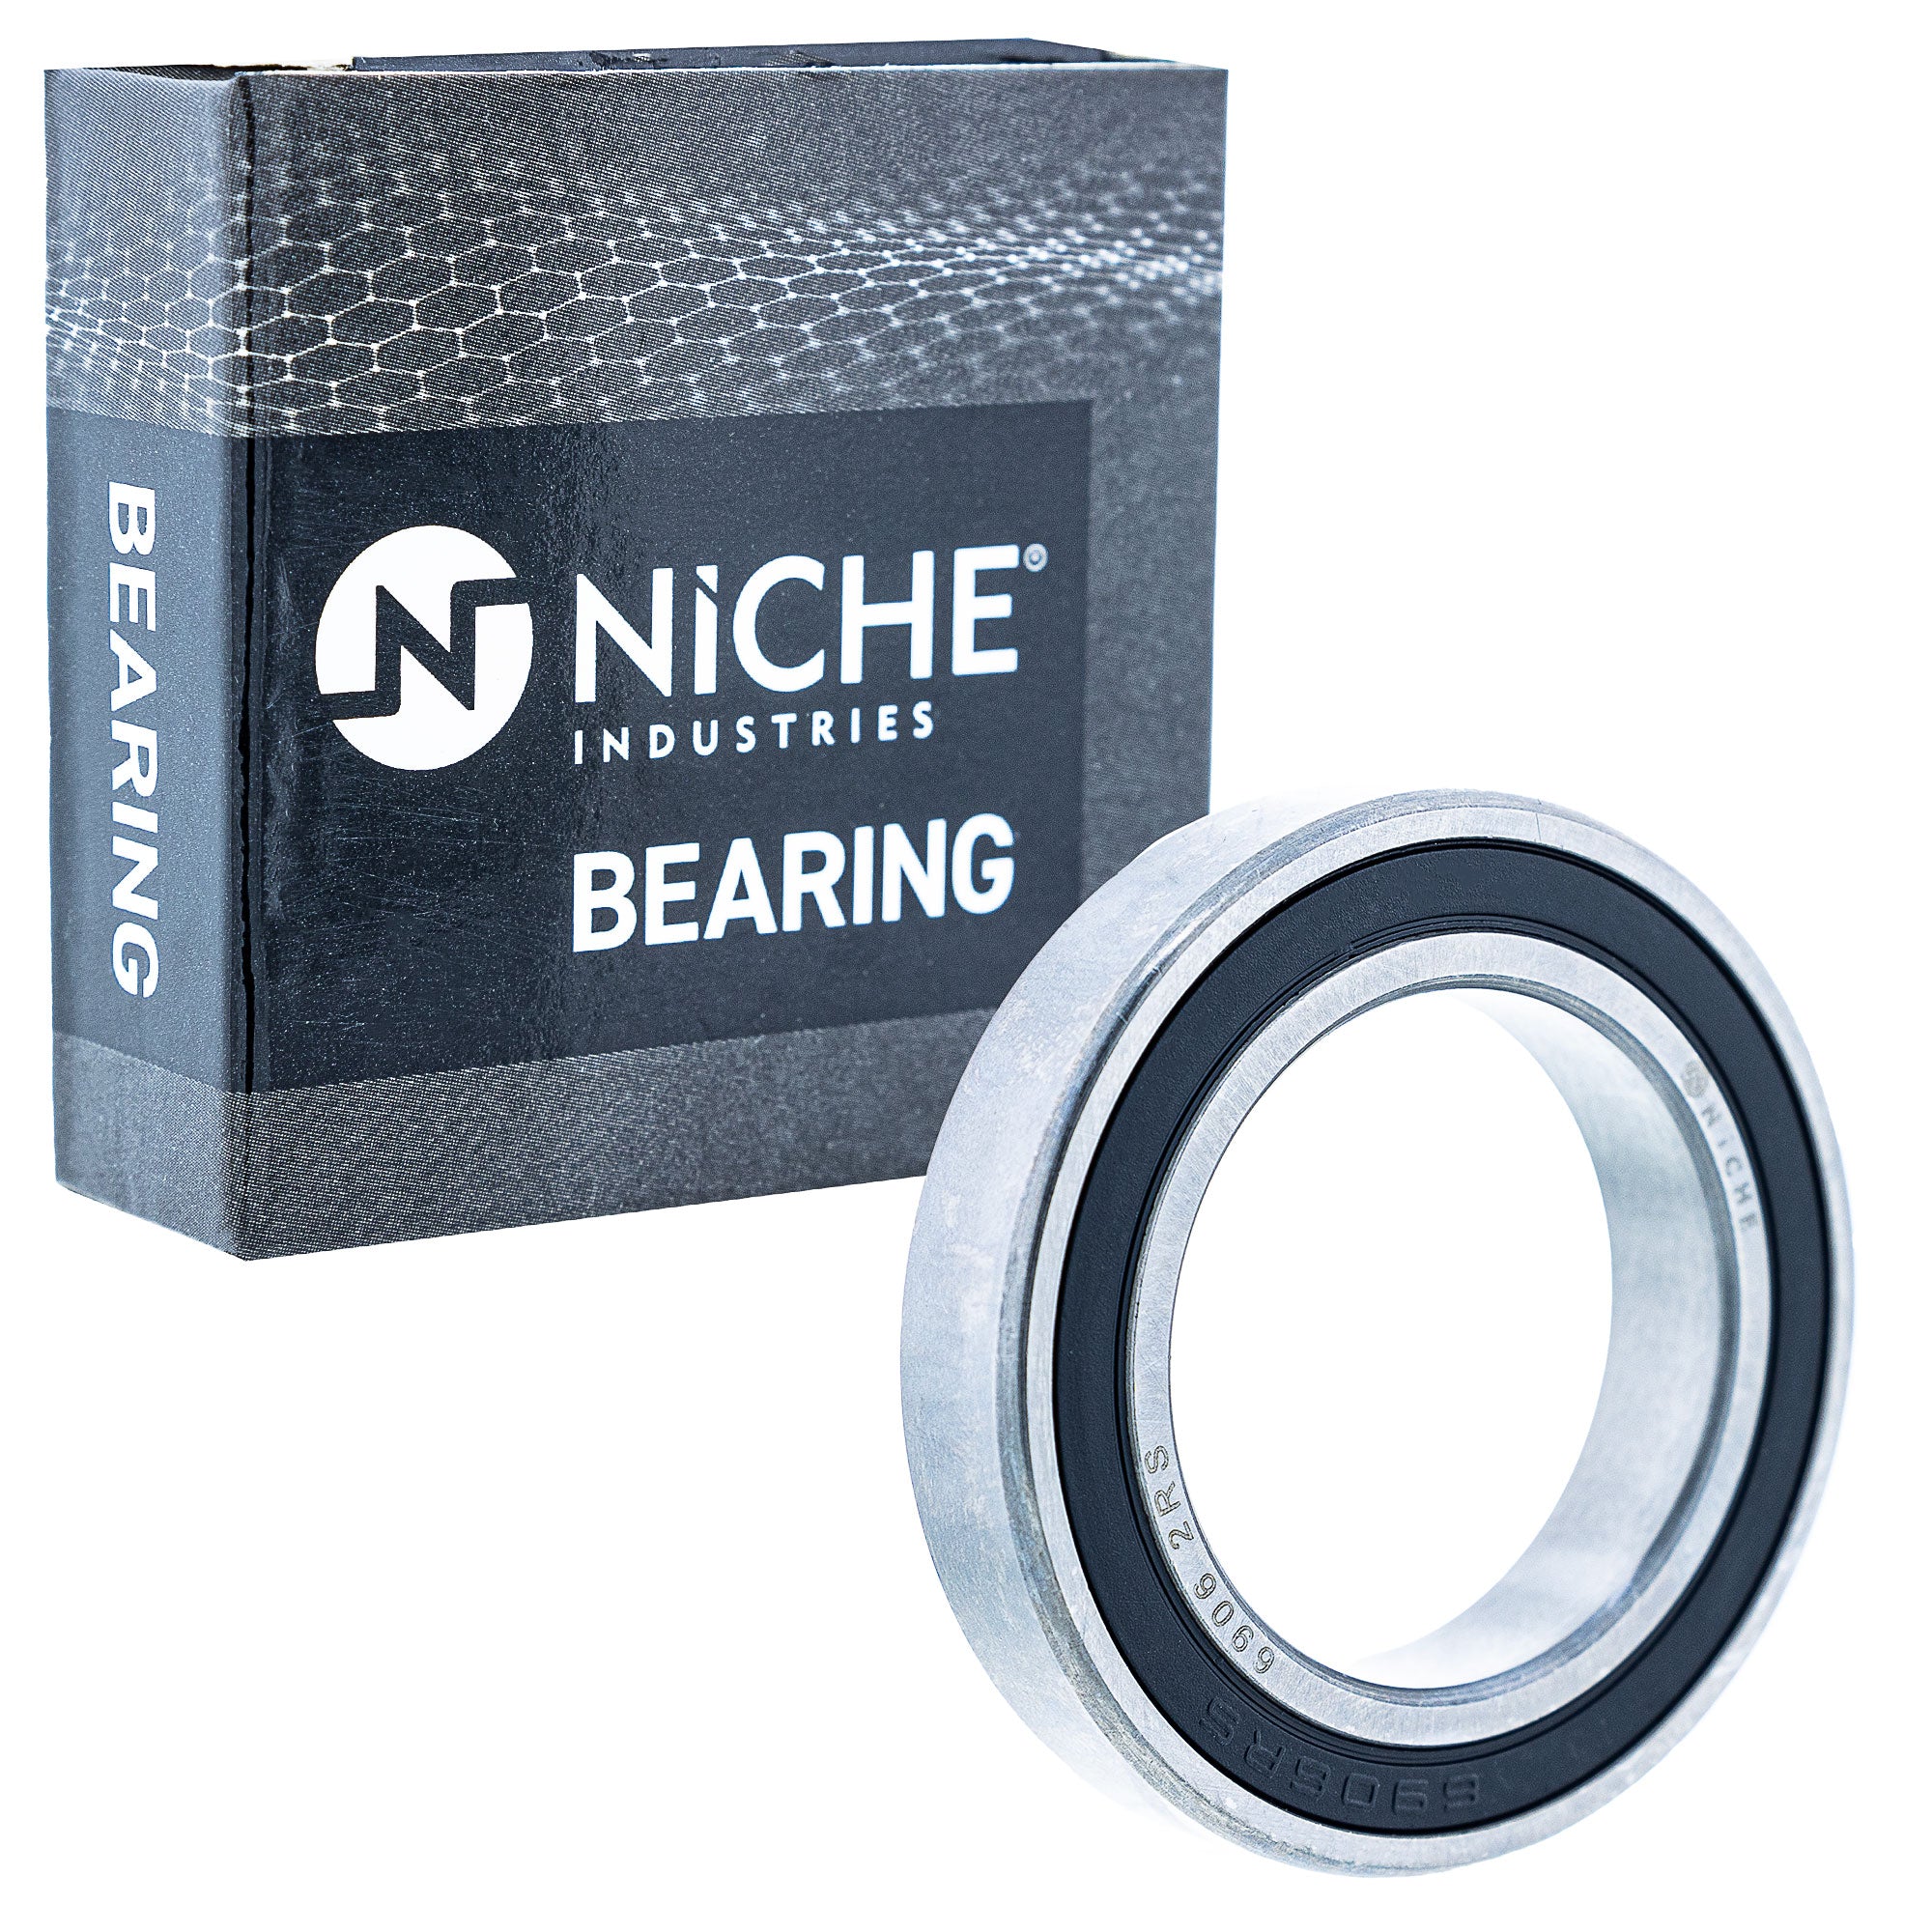 NICHE 519-CBB2250R Bearing & Seal Kit 2-Pack for zOTHER